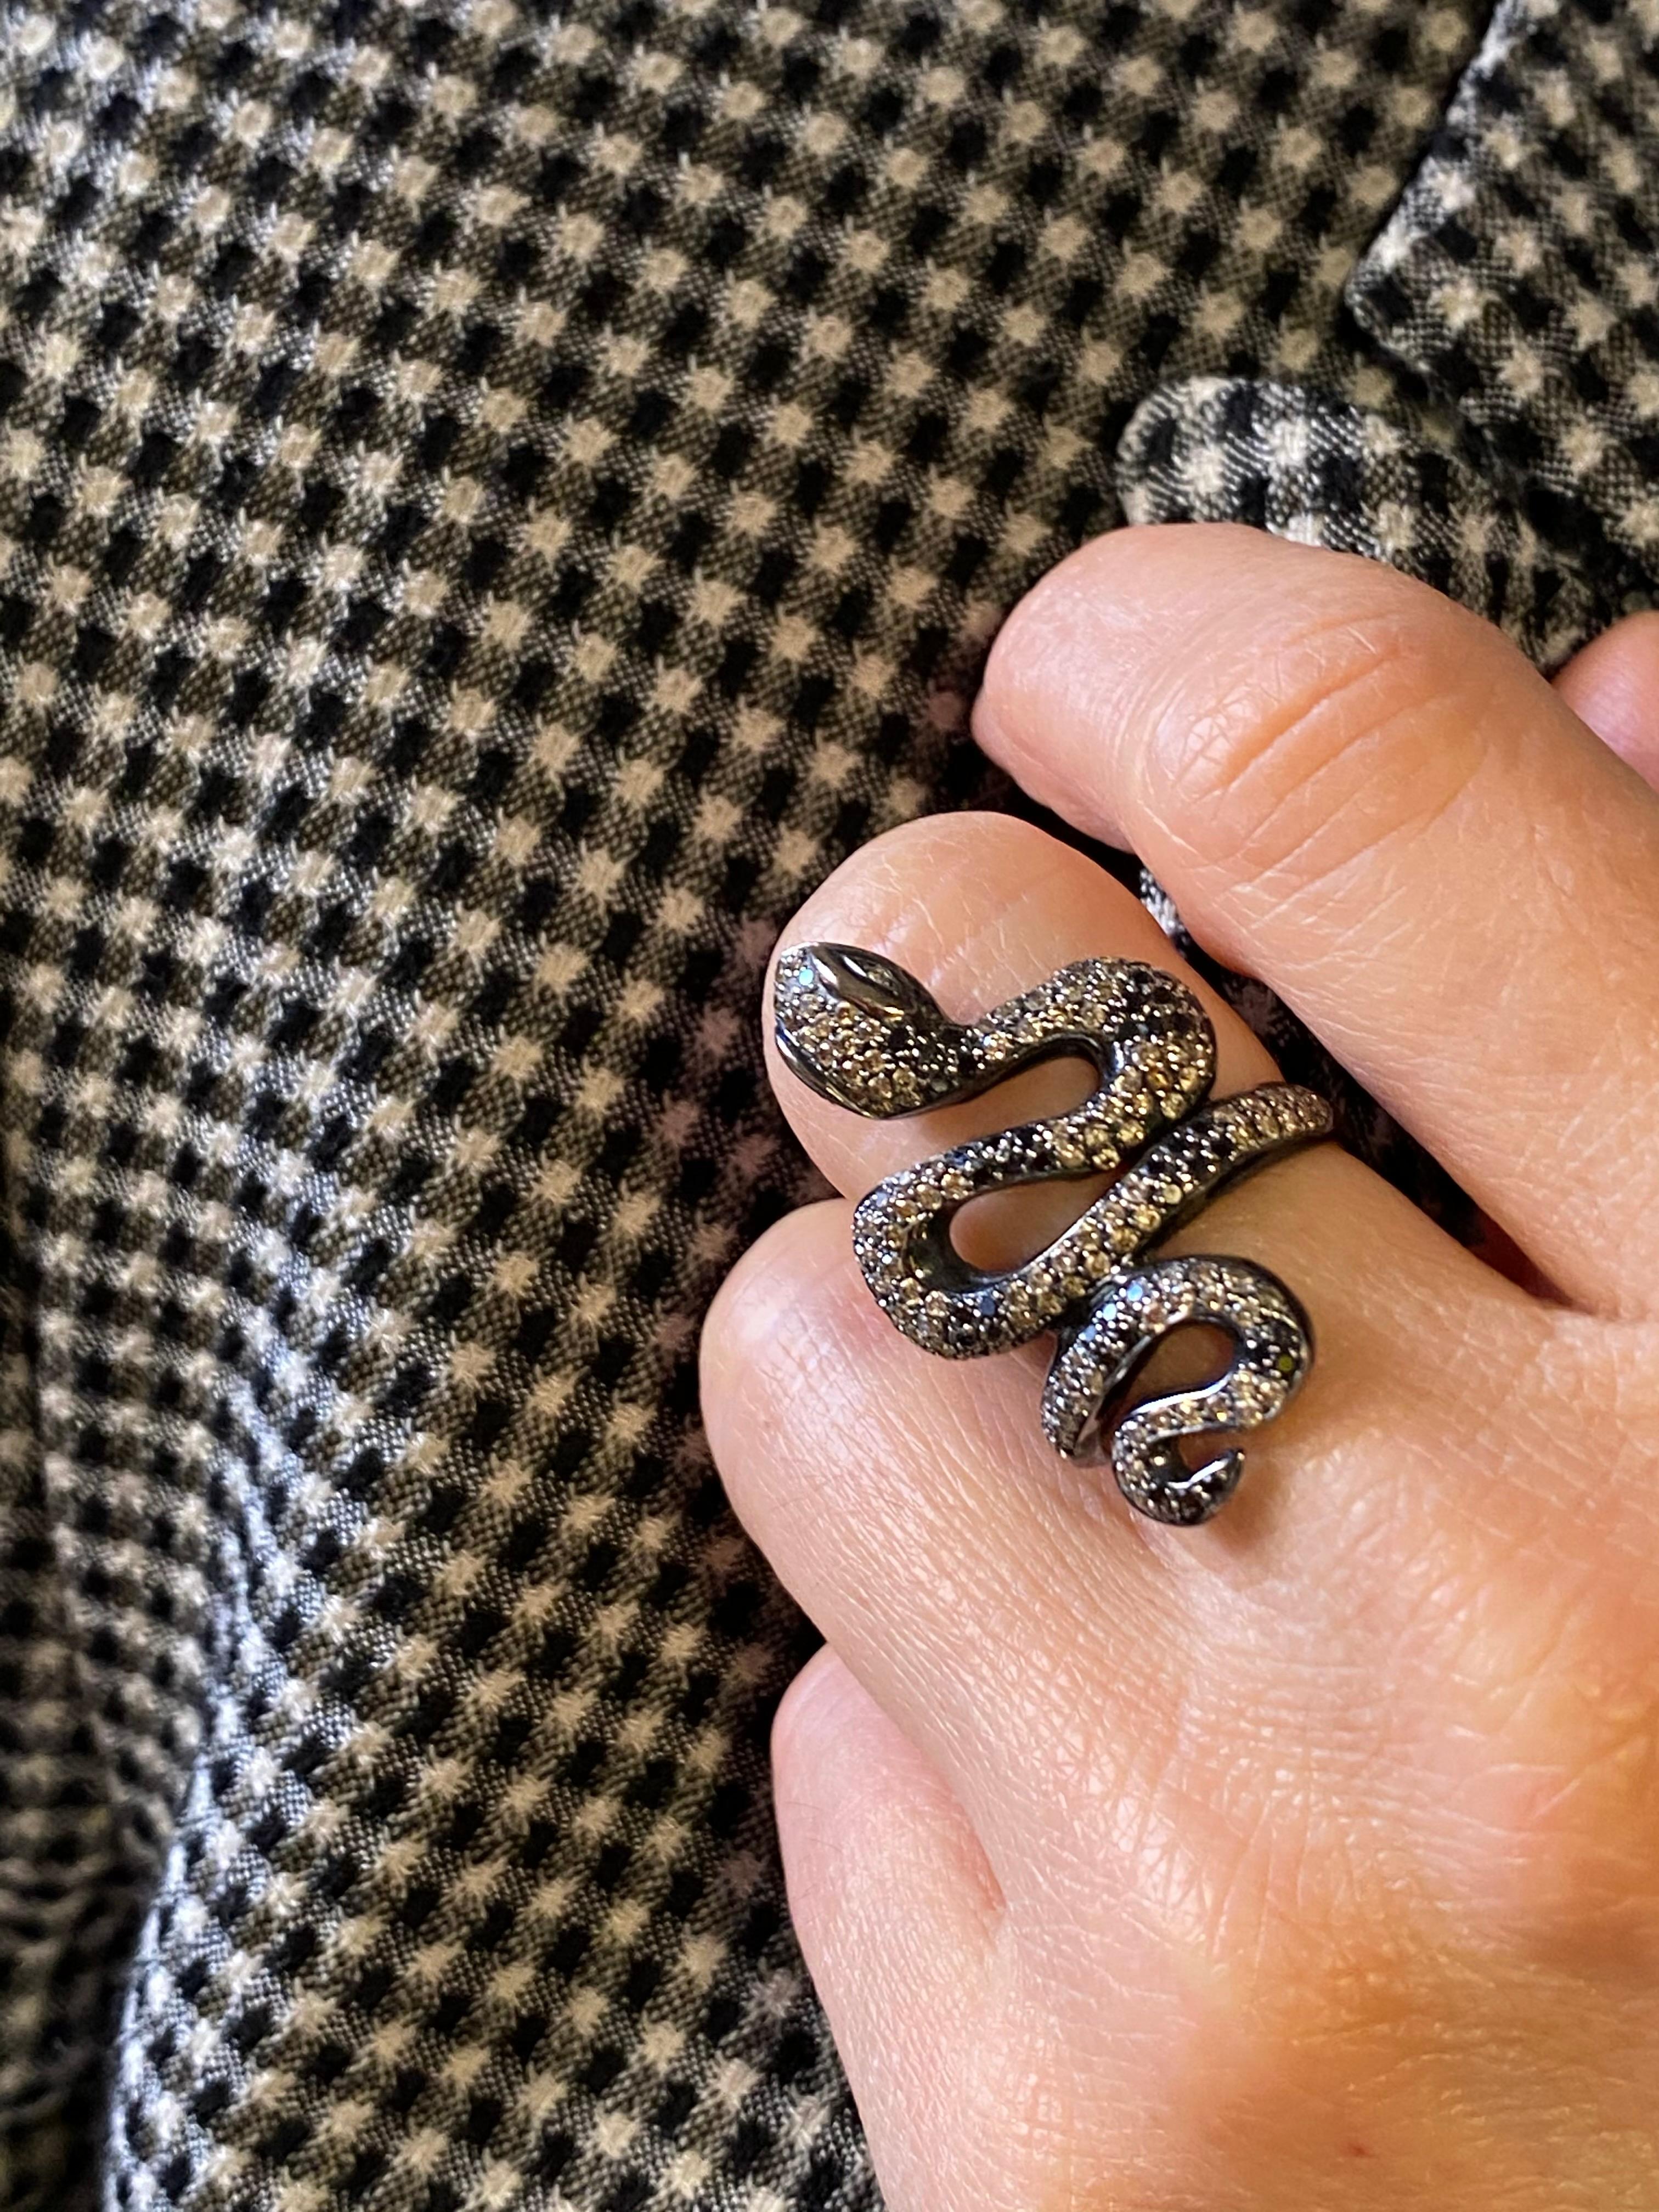 Rossella Ugolini Design Collection, 18 Karat Burnished White Gold 1,90 Karat Brown & Black Diamonds Snake Cocktail Design Ring.
This ring takes inspiration by the snake and its royalty: the winding is represented by the design of the ring.
A